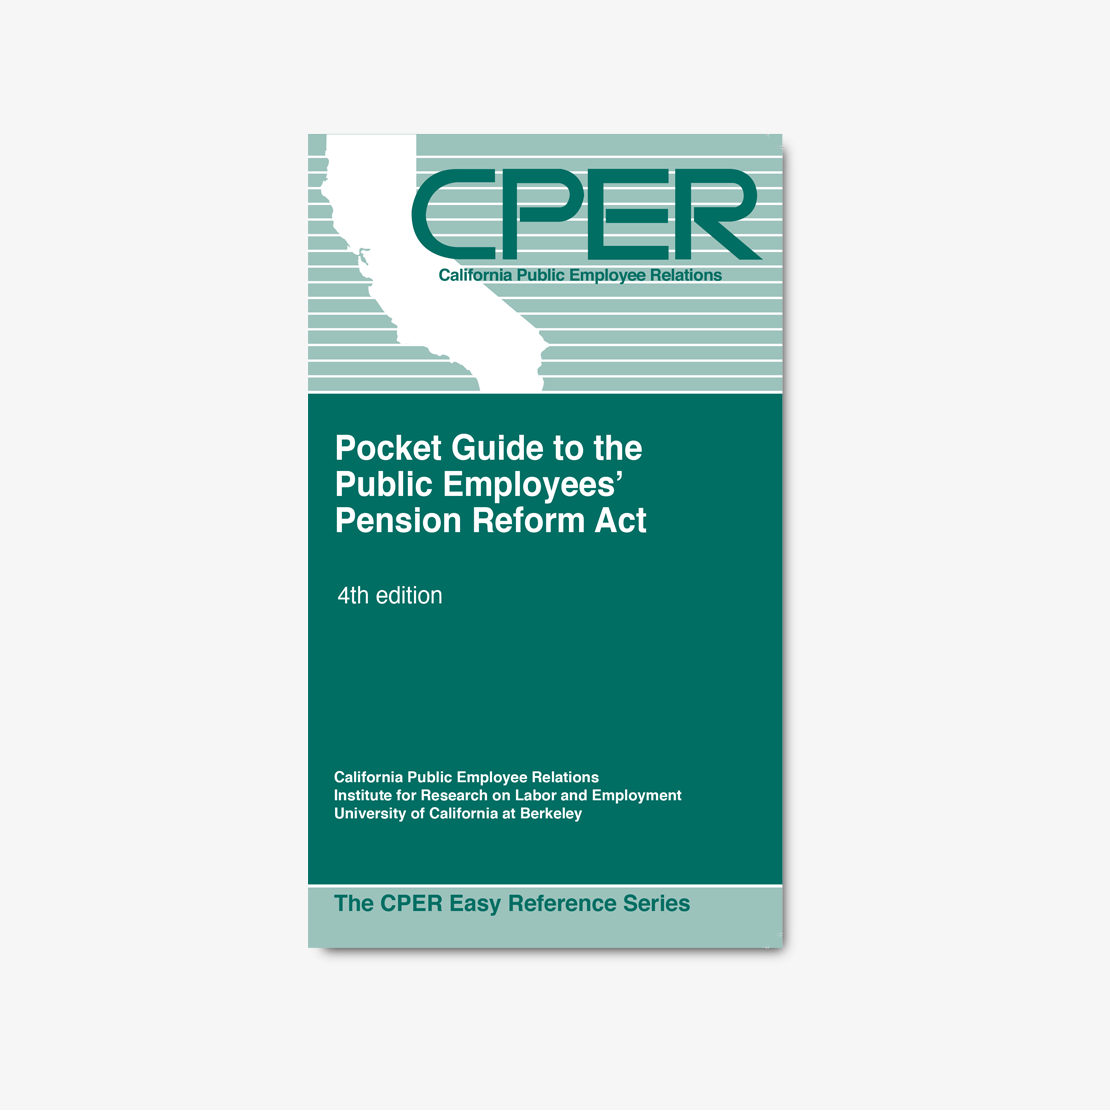 Pocket Guide to the Public Employees’ Pension Reform Act (2019, 4th Edition)